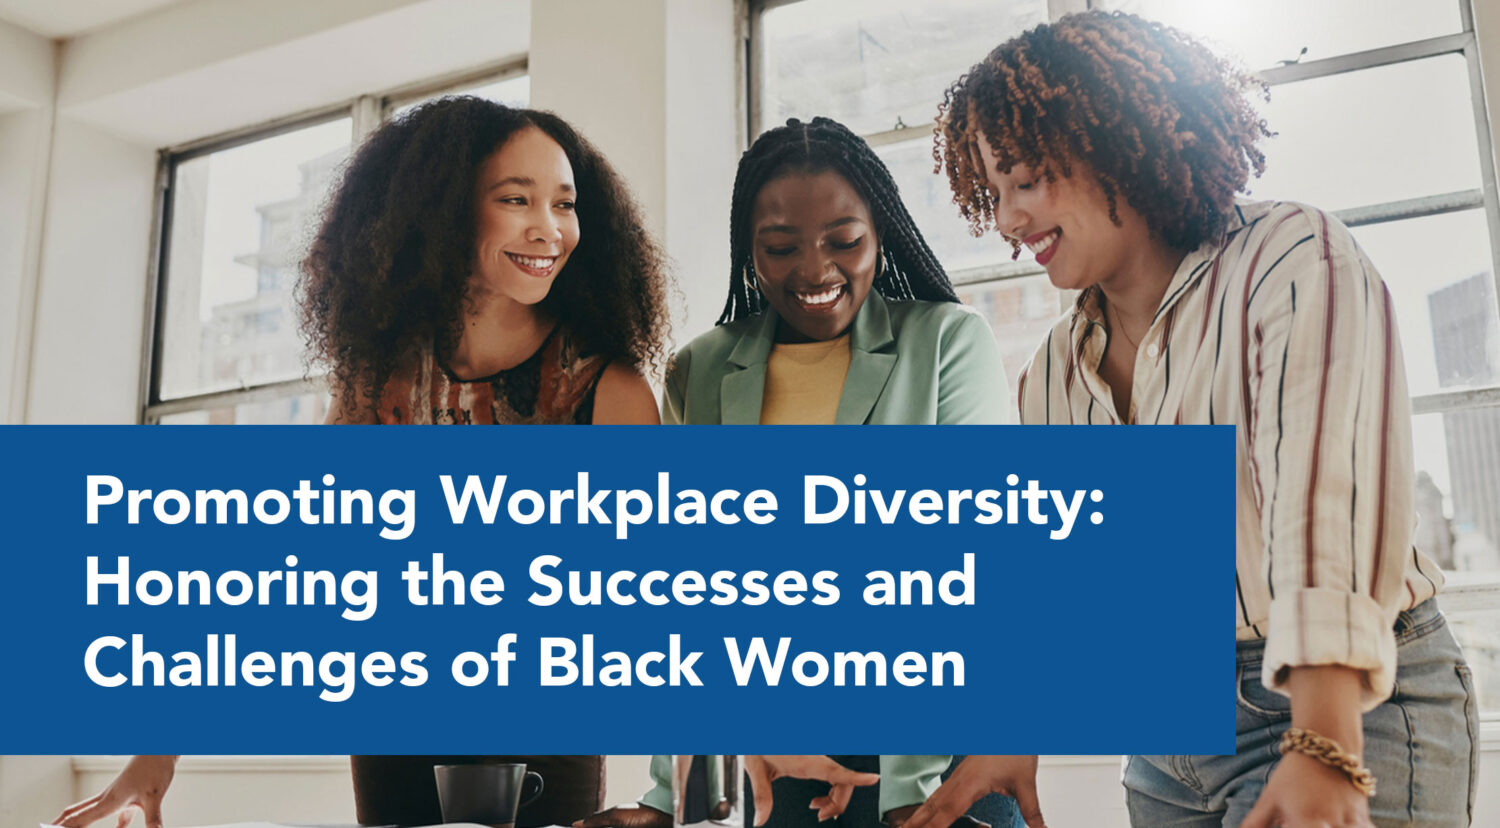 Promoting Workplace Diversity: Honoring the Successes and Challenges of Black Women